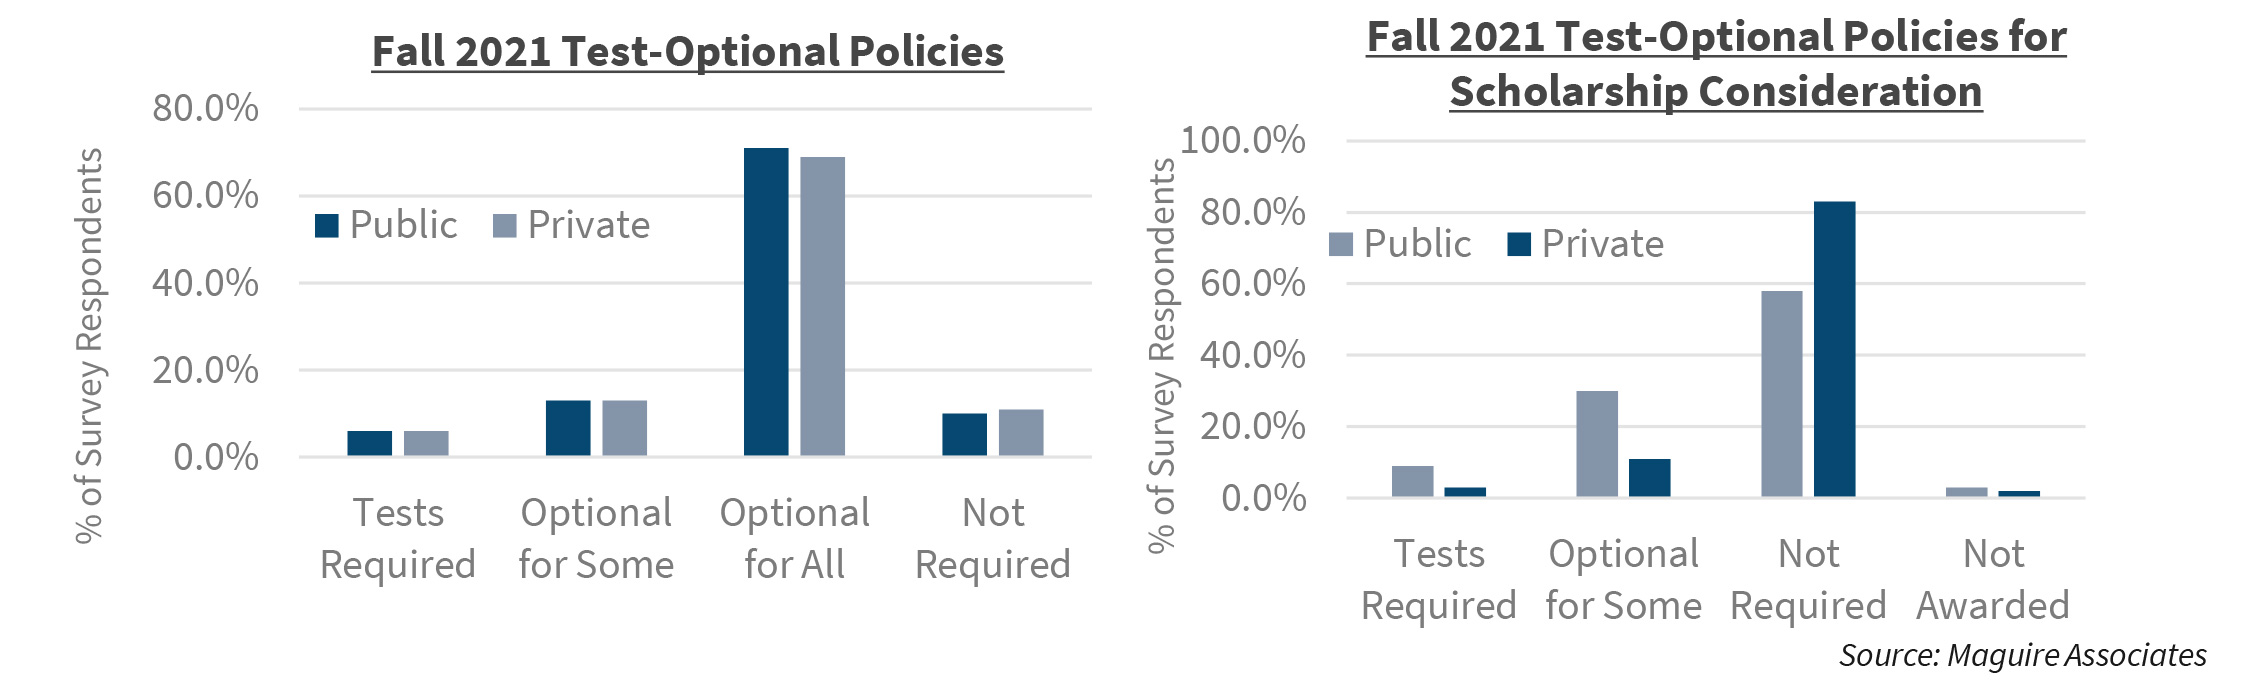 Fall 2021 Test-Optional Policies | Fall 2021 Test-Optional Policies for Scholarship Consideration